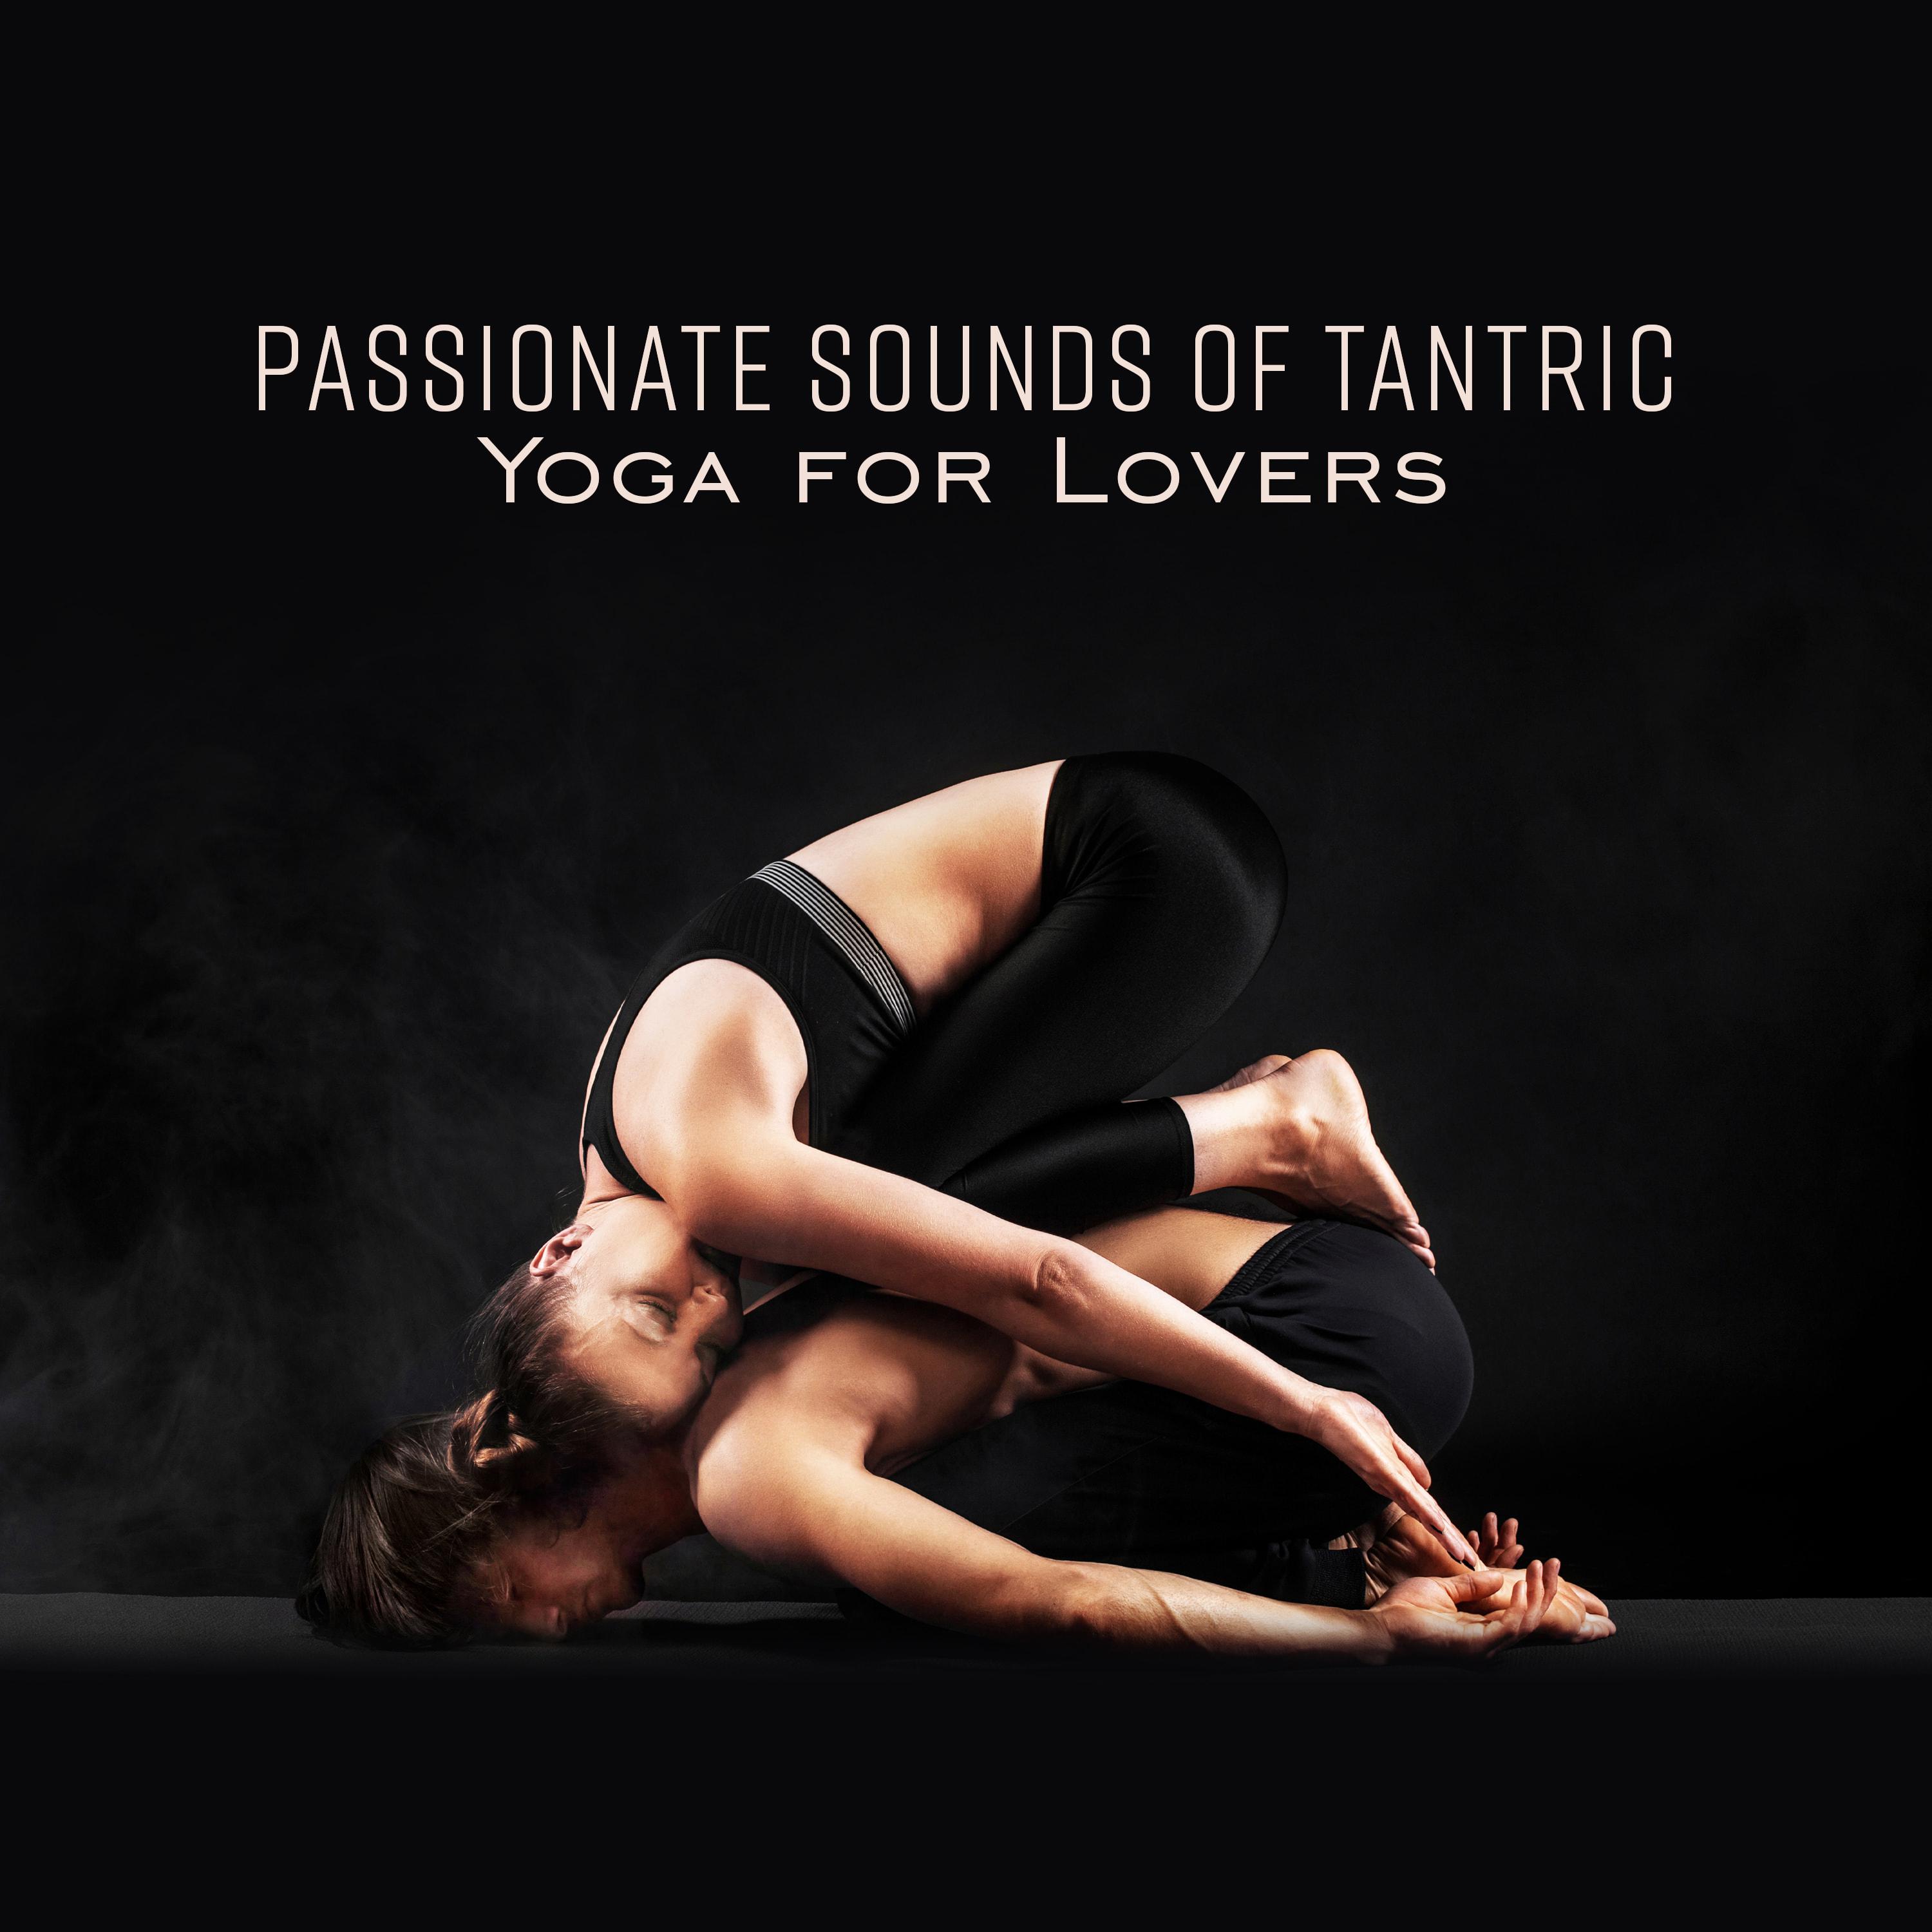 Passionate Sounds of Tantric Yoga for Lovers